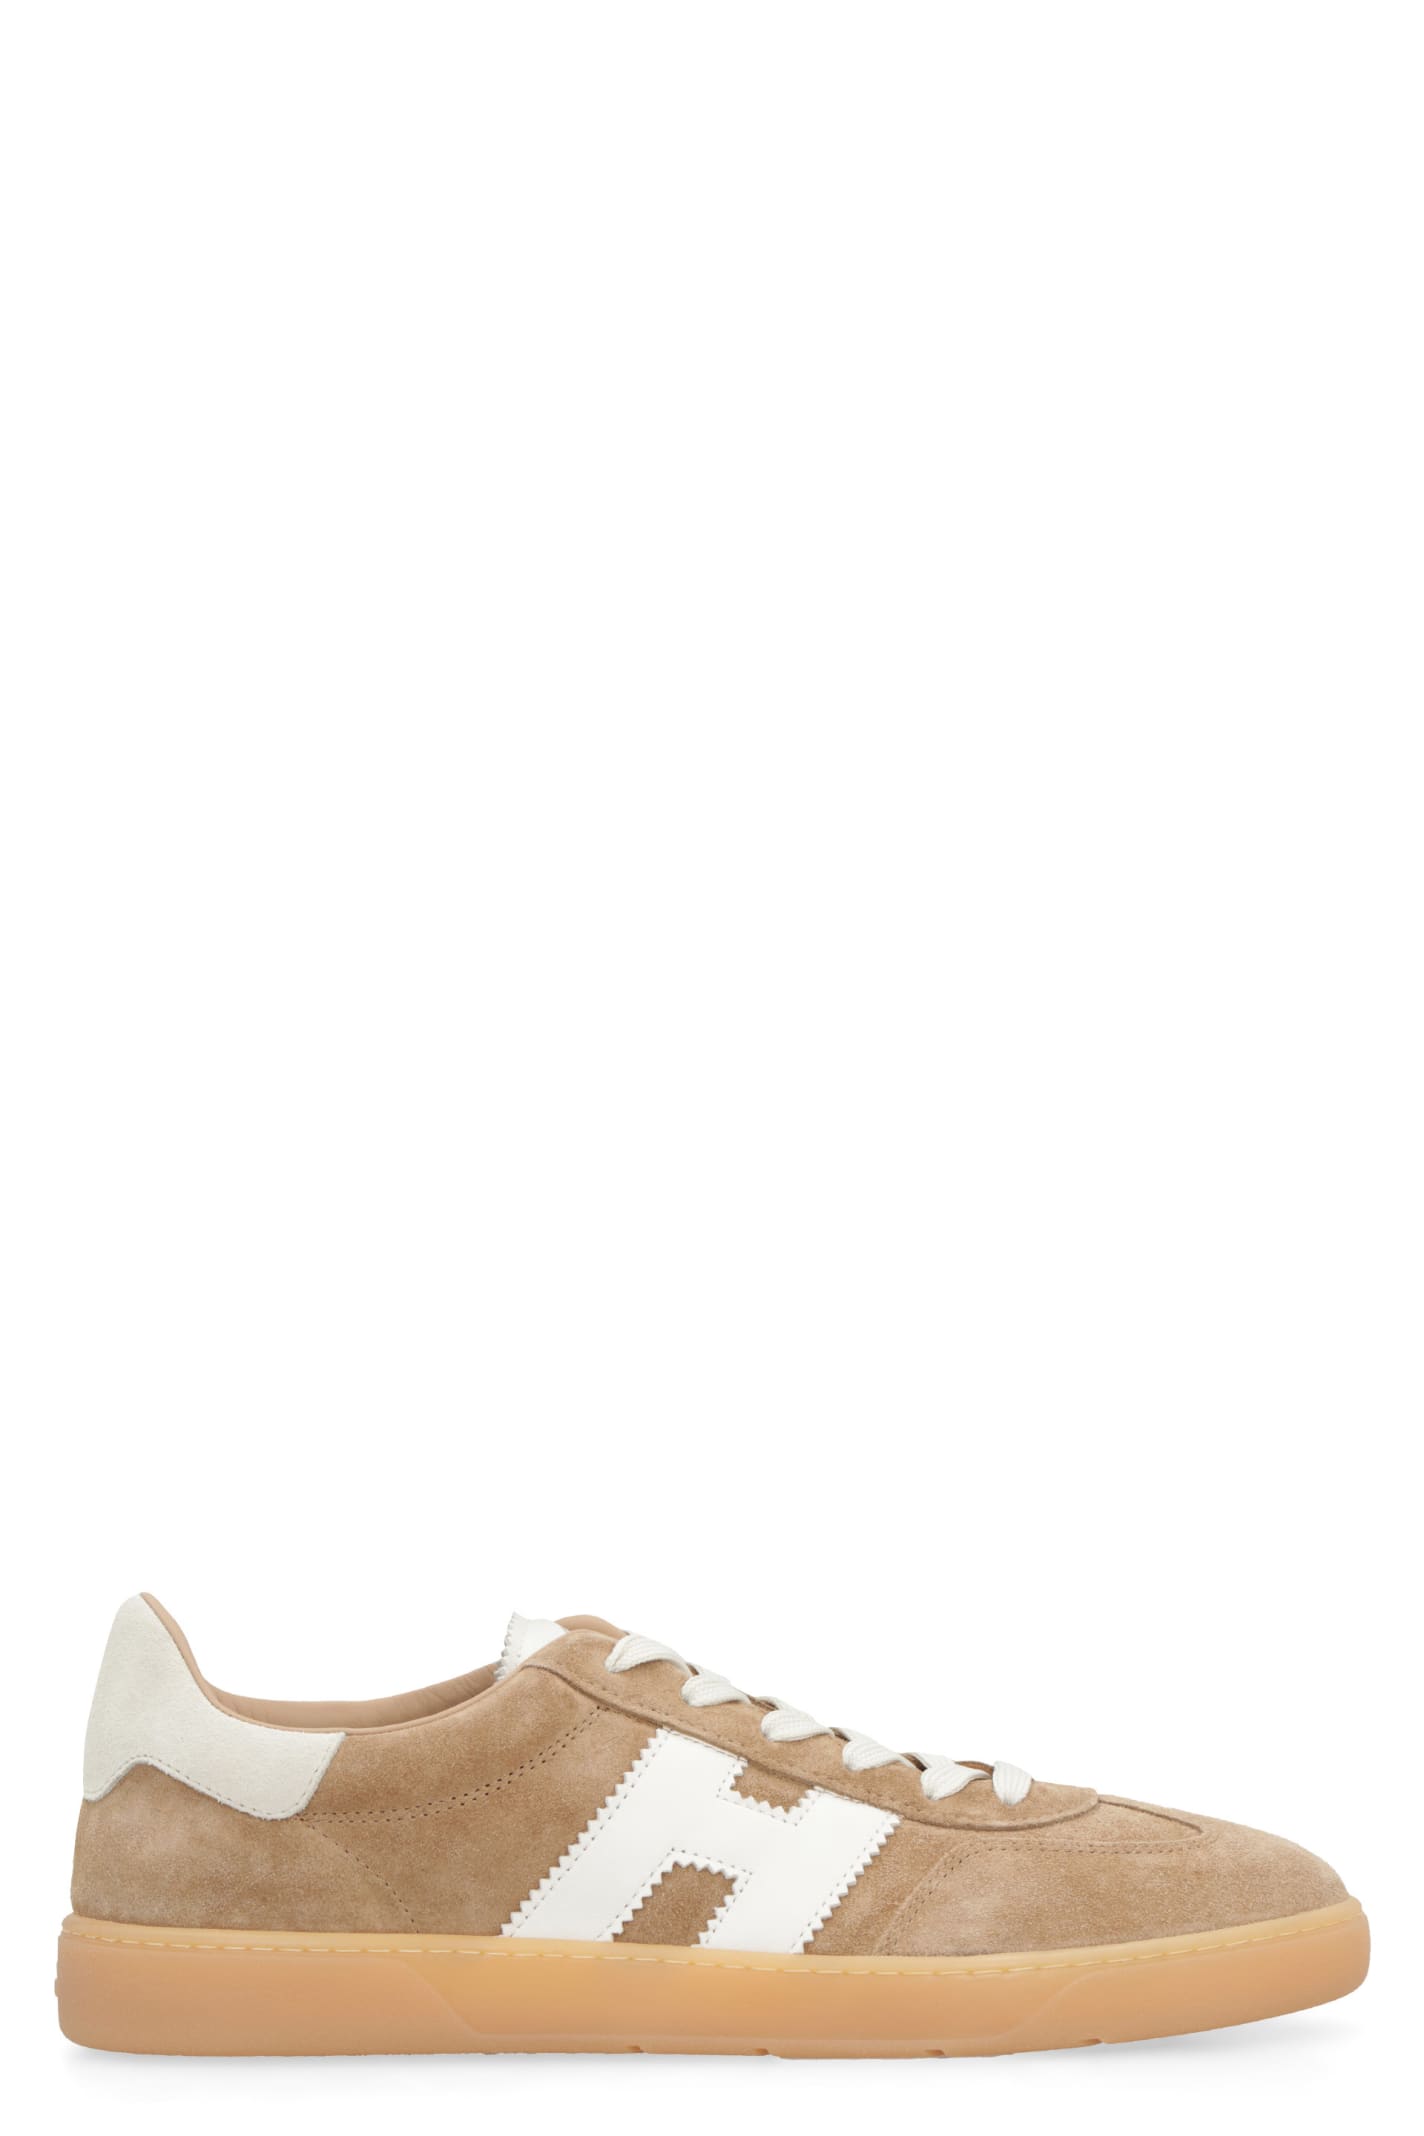 Shop Hogan Cool Leather Low-top Sneakers